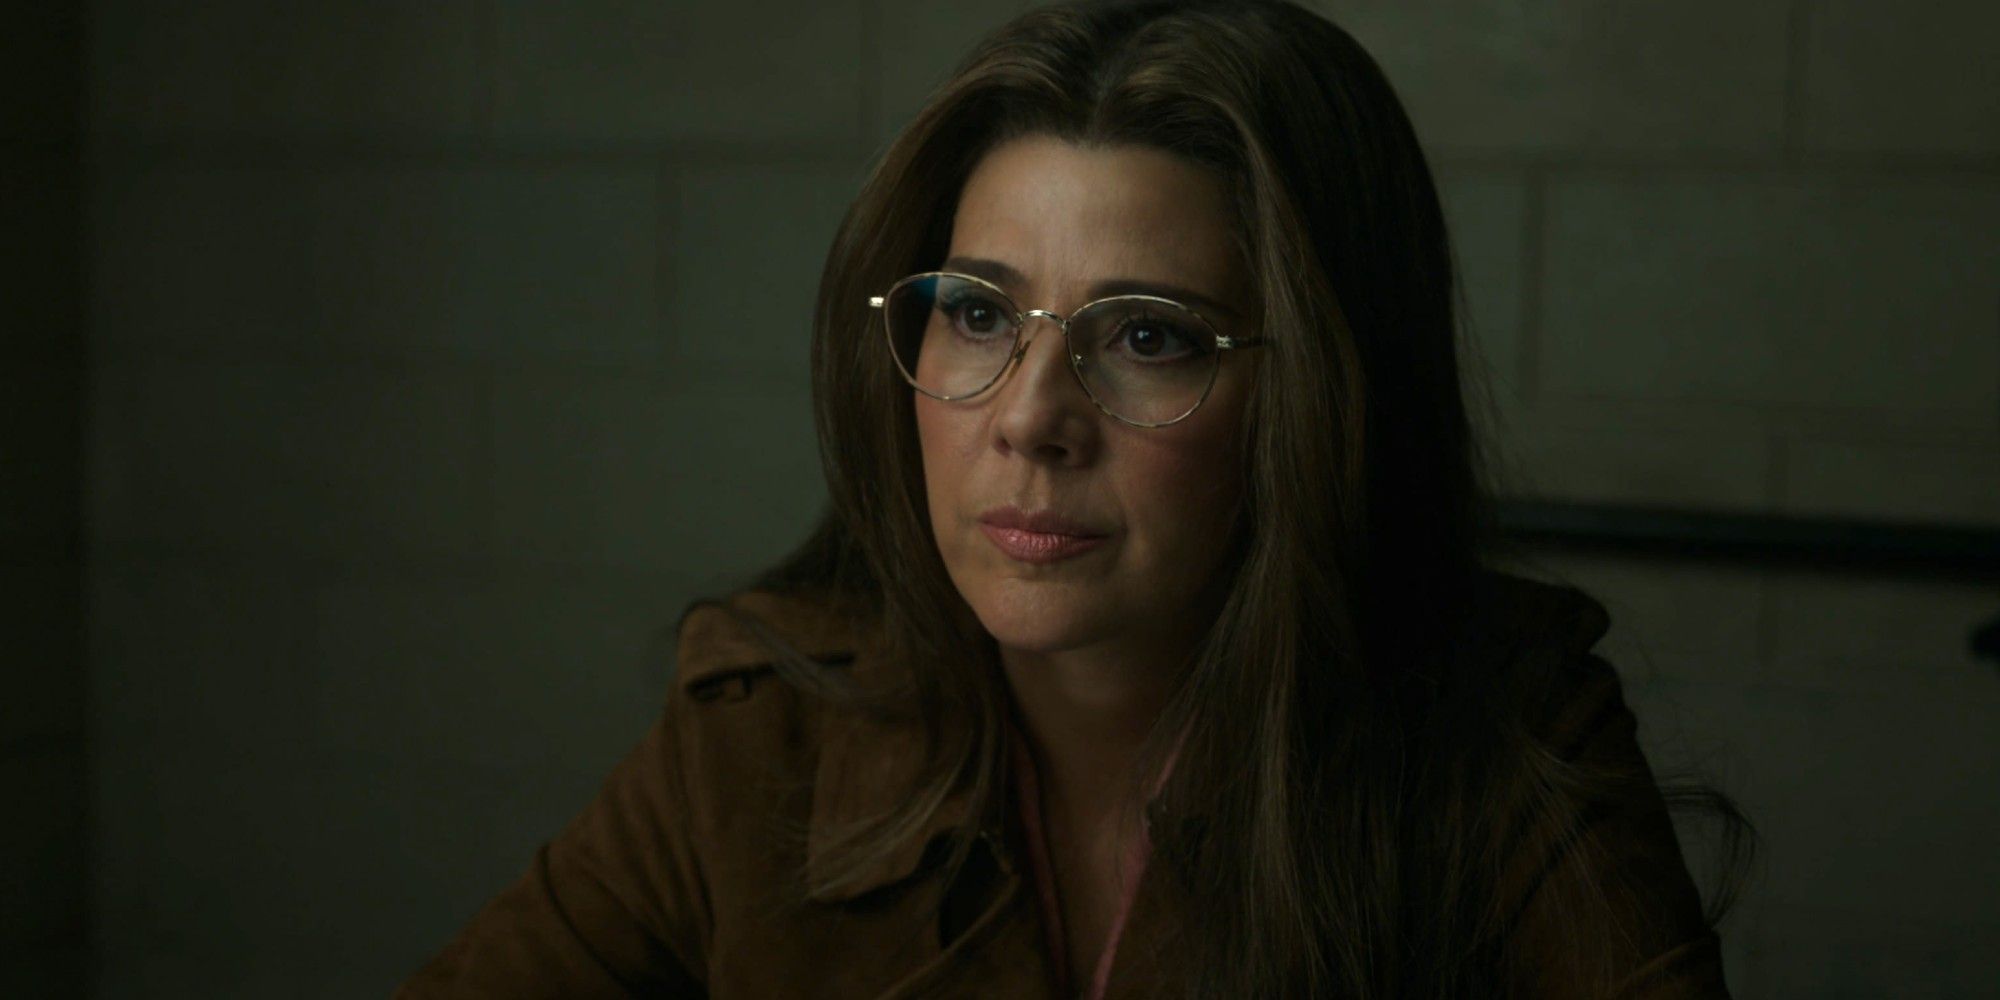 Aunt May during the Damage Control interrogation from Spider-Man: No Way Home.